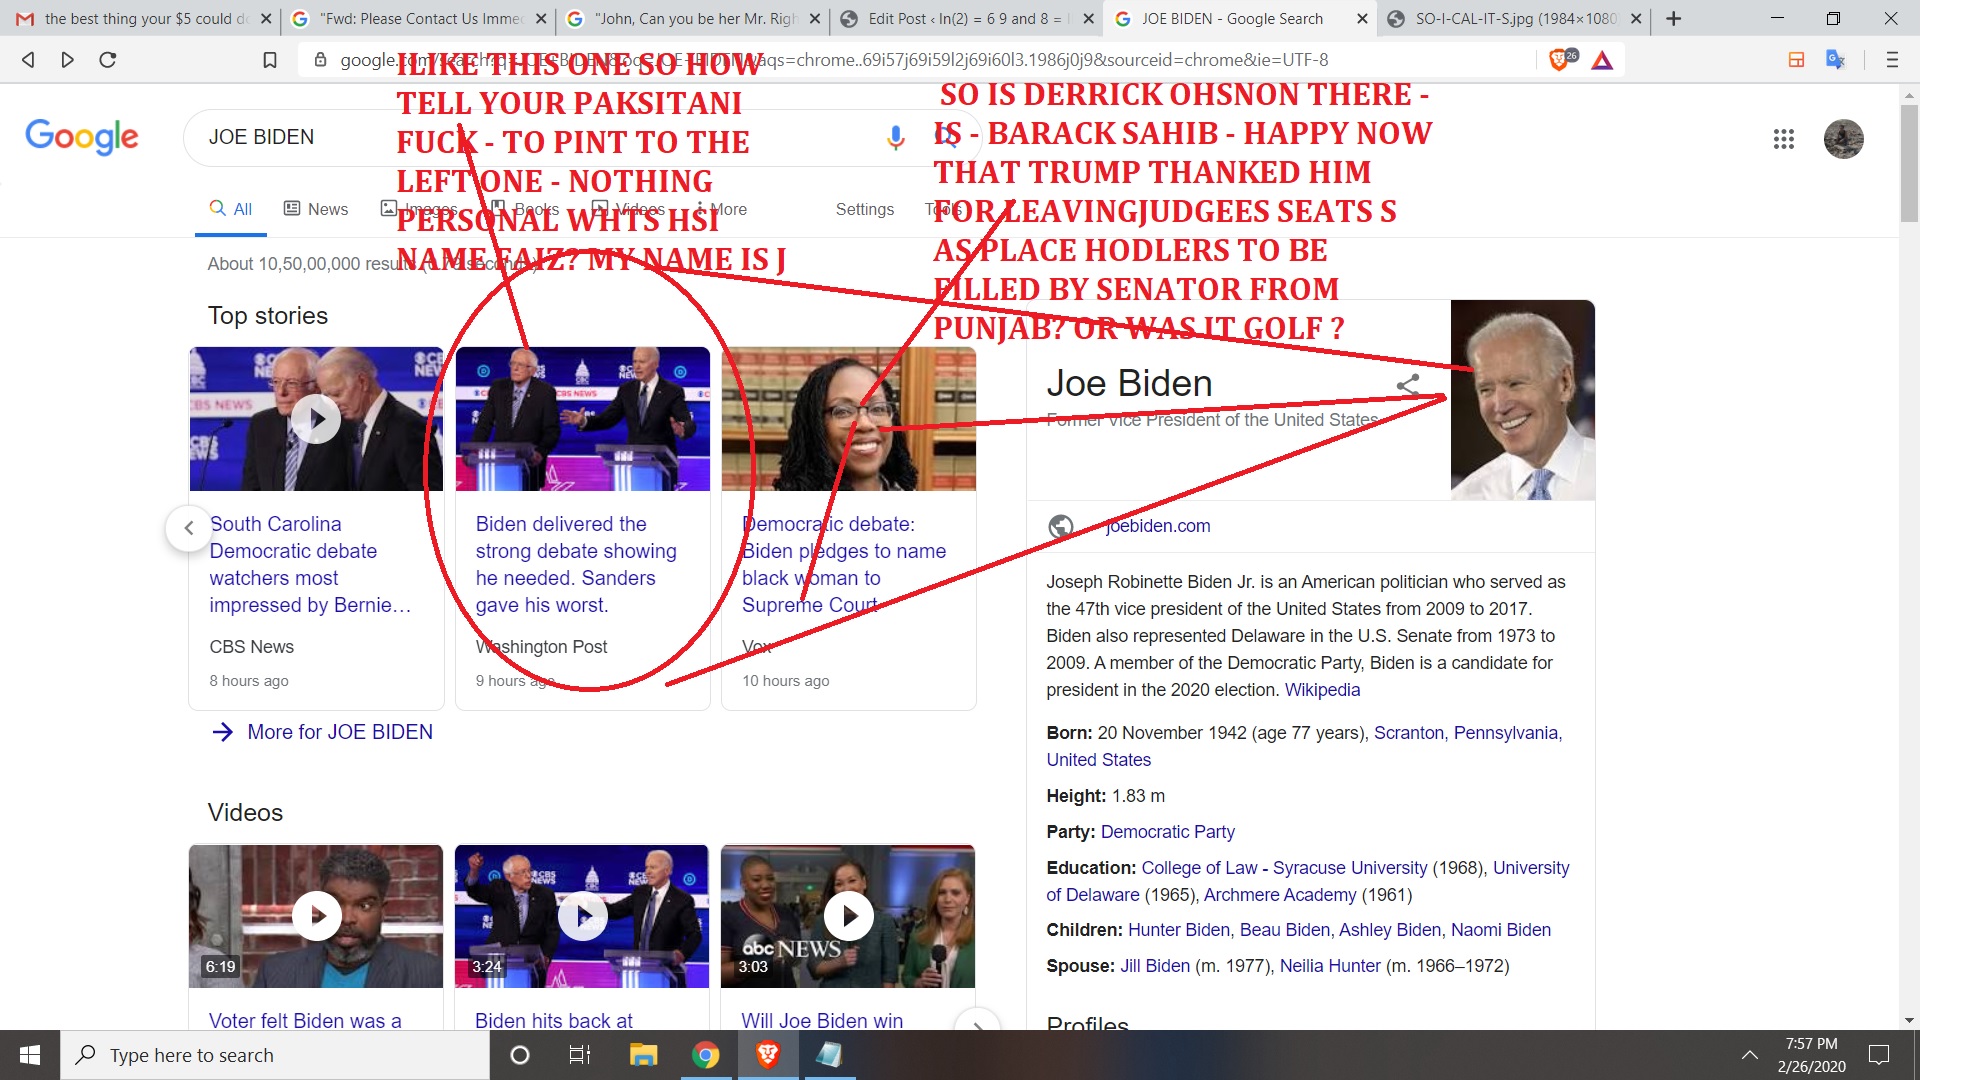 JOE BIDEN SUPEREM SCOUT AND NIGGEROS AND BALCKS AND AFRICAN AMERICAN AND ABERNIE AND WHAT